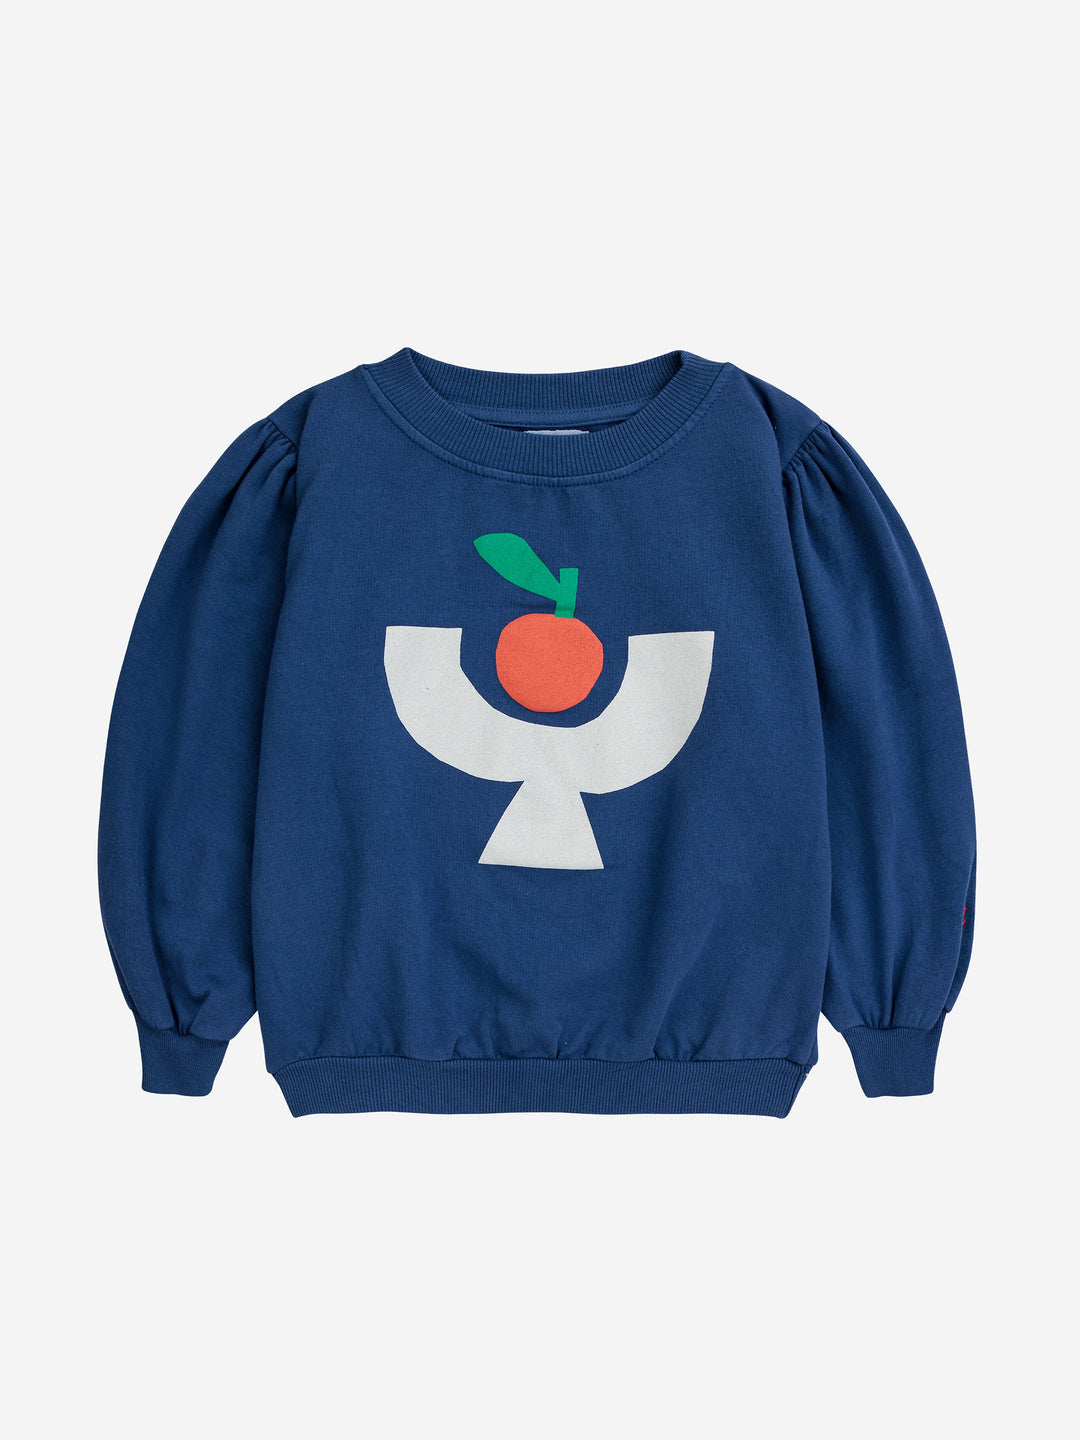 Sweater Tomato Plate Navy Blue